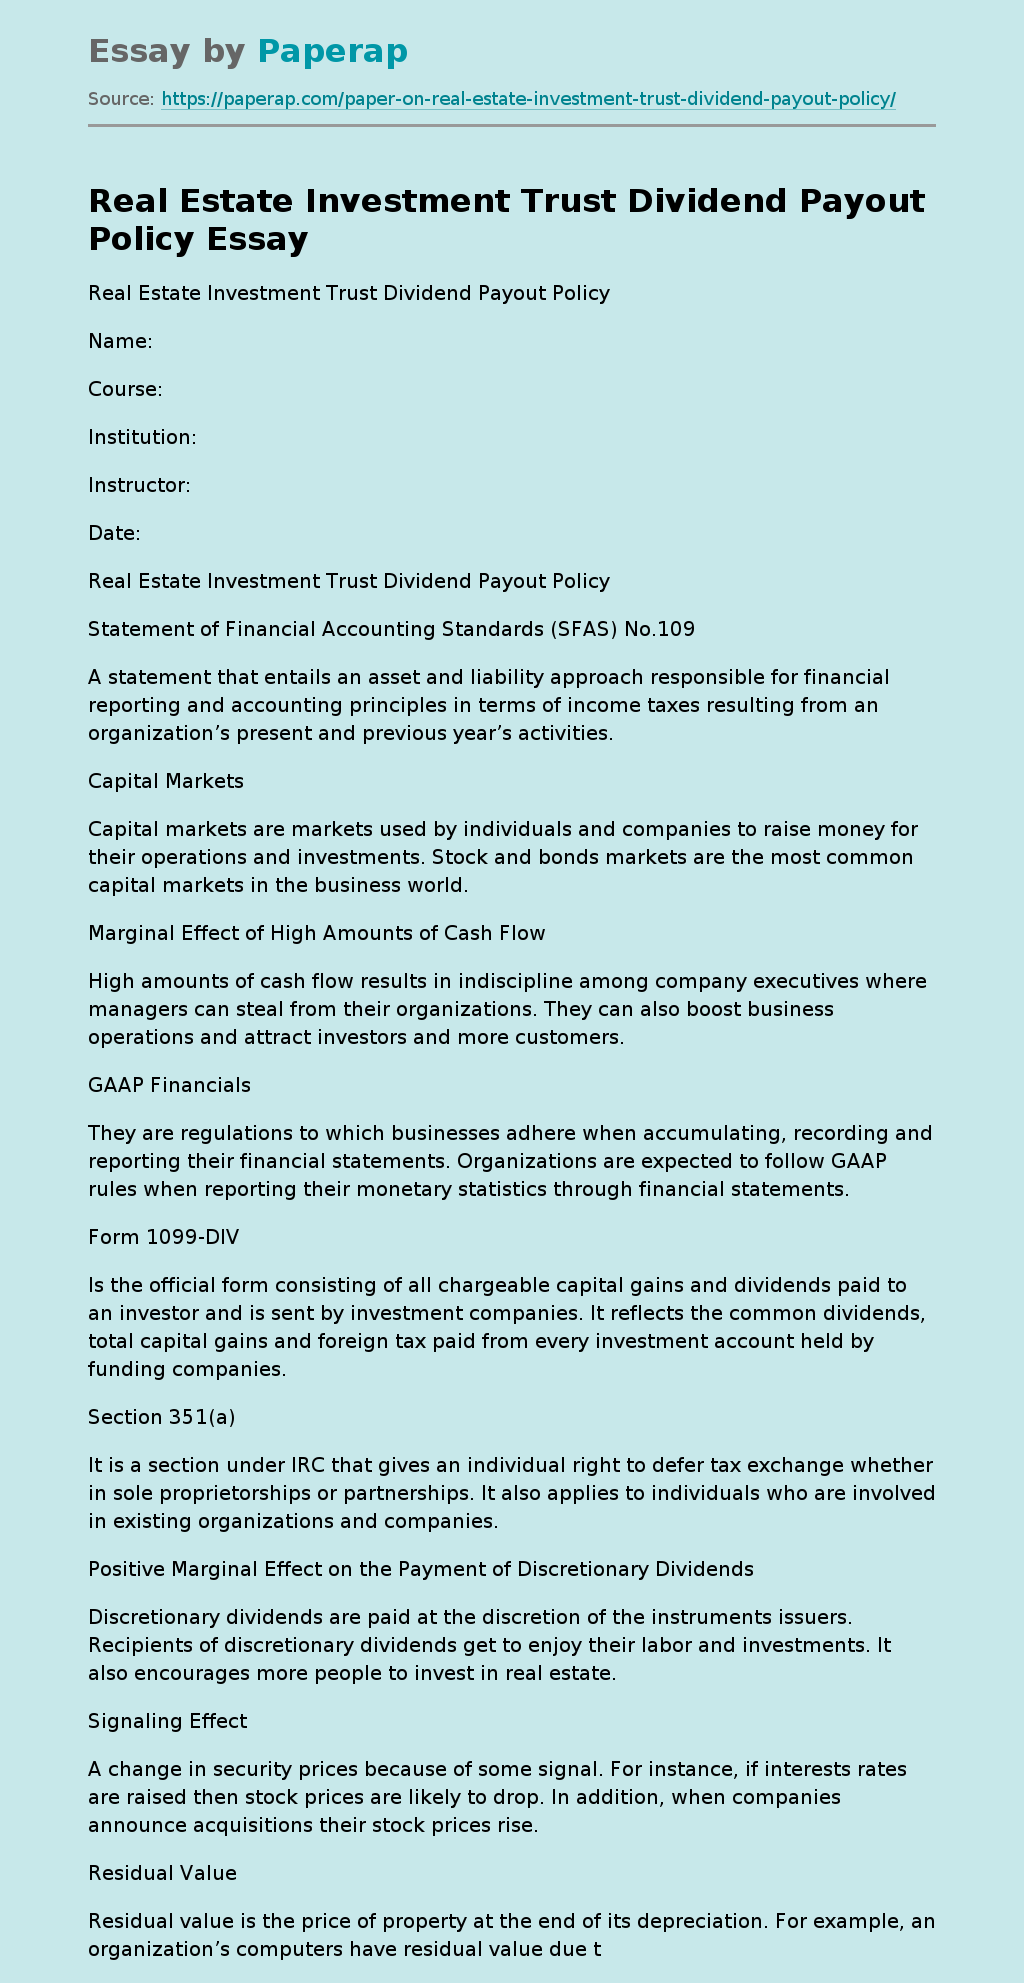 Real Estate Investment Trust Dividend Payout Policy